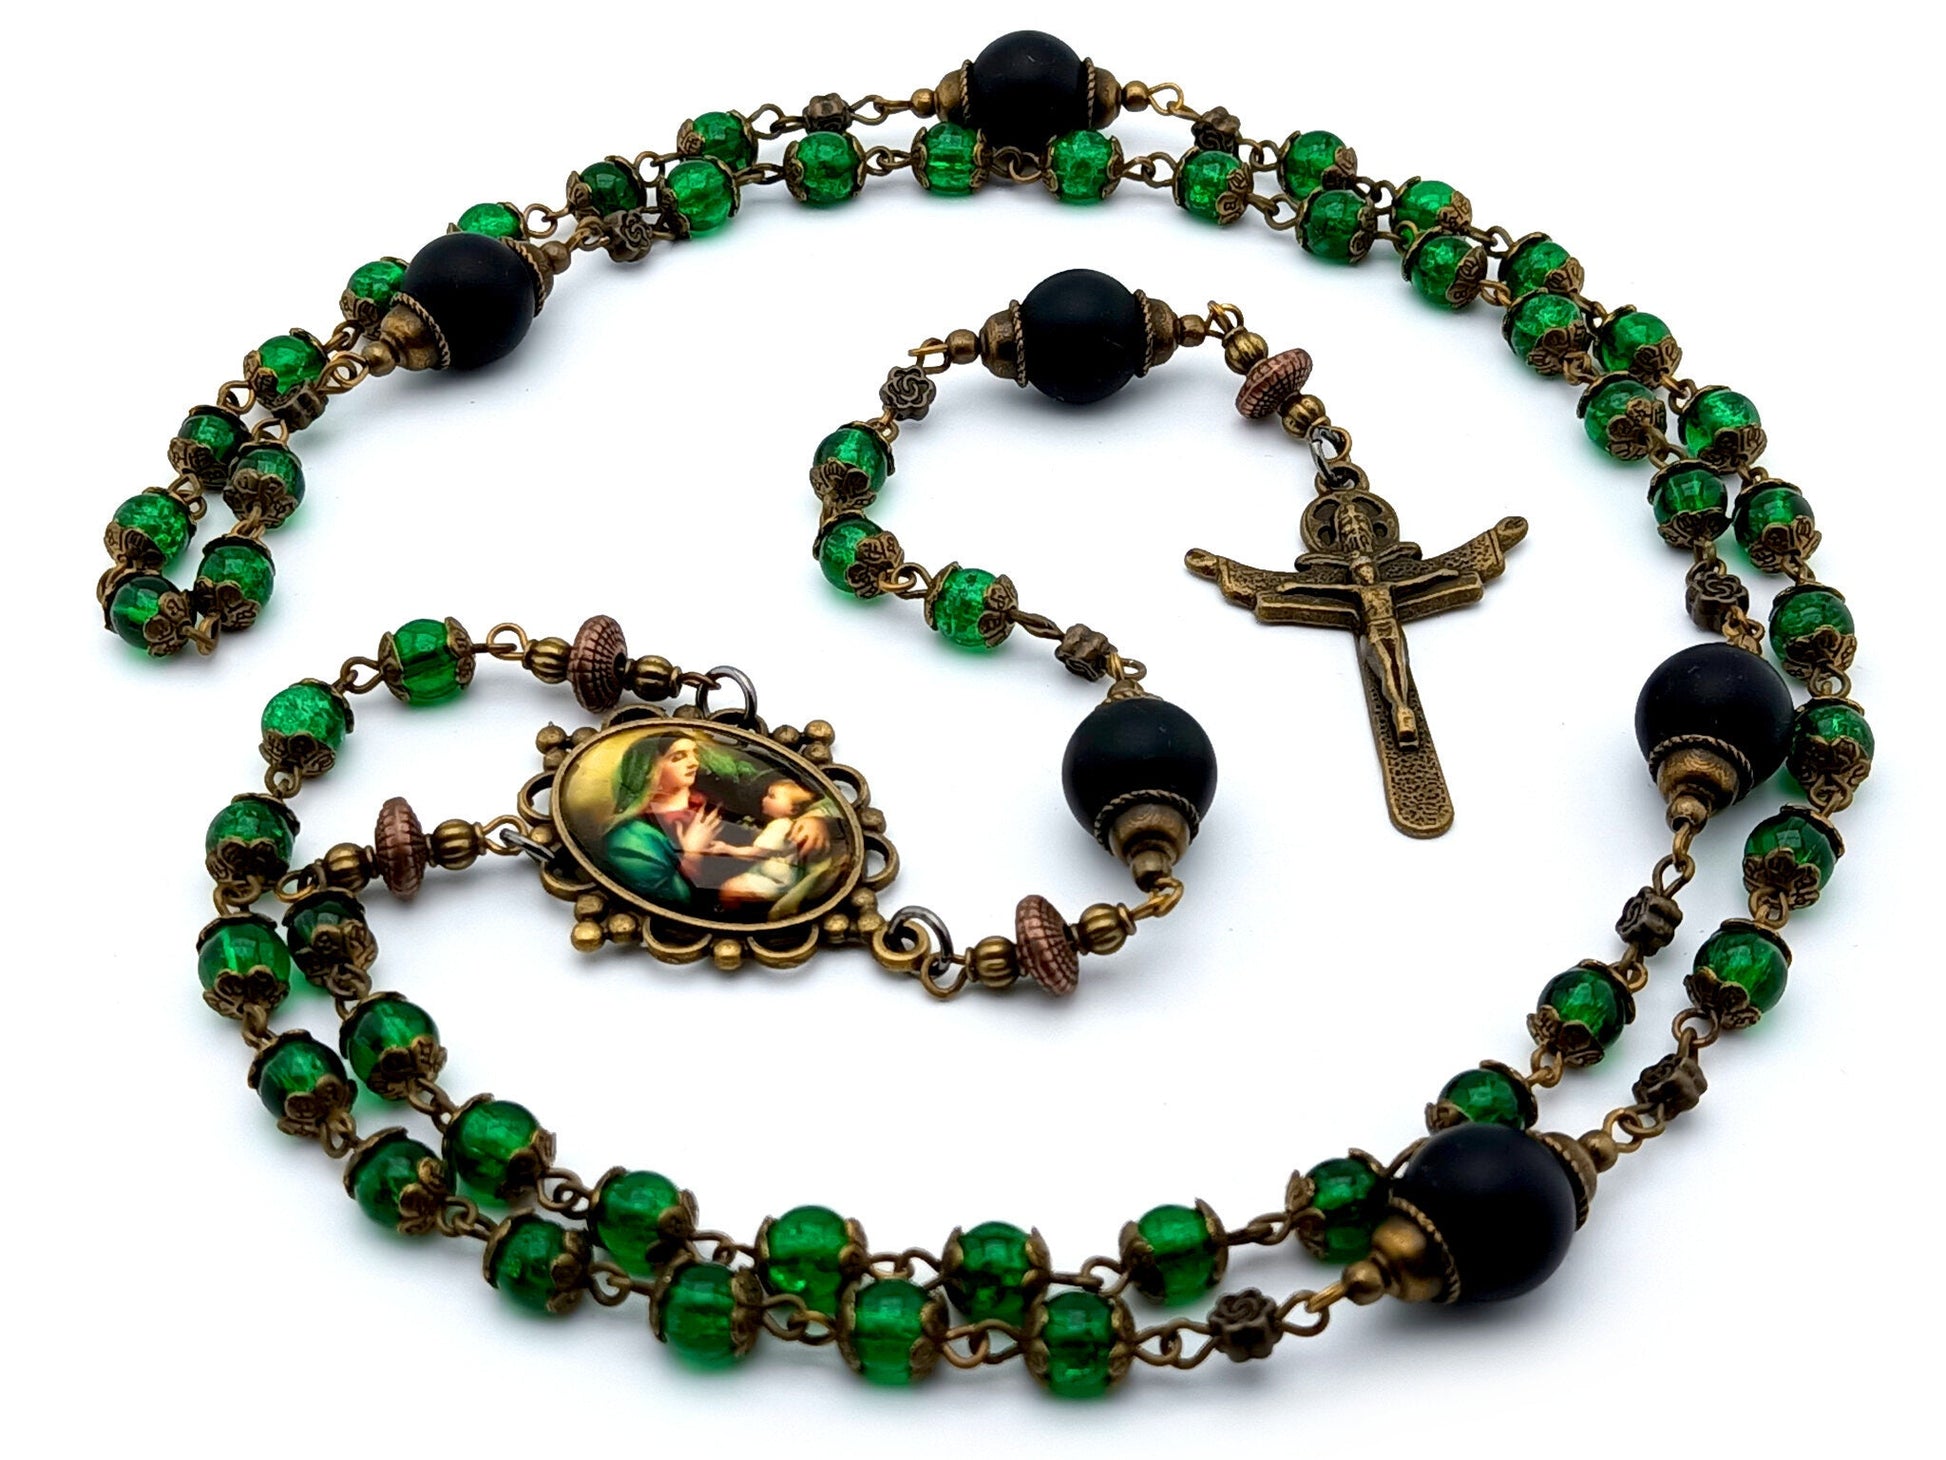 Virgin Mother and child unique rosary beads with green glass and black matt onyx beads, bronze crucifix and picture centre medal.